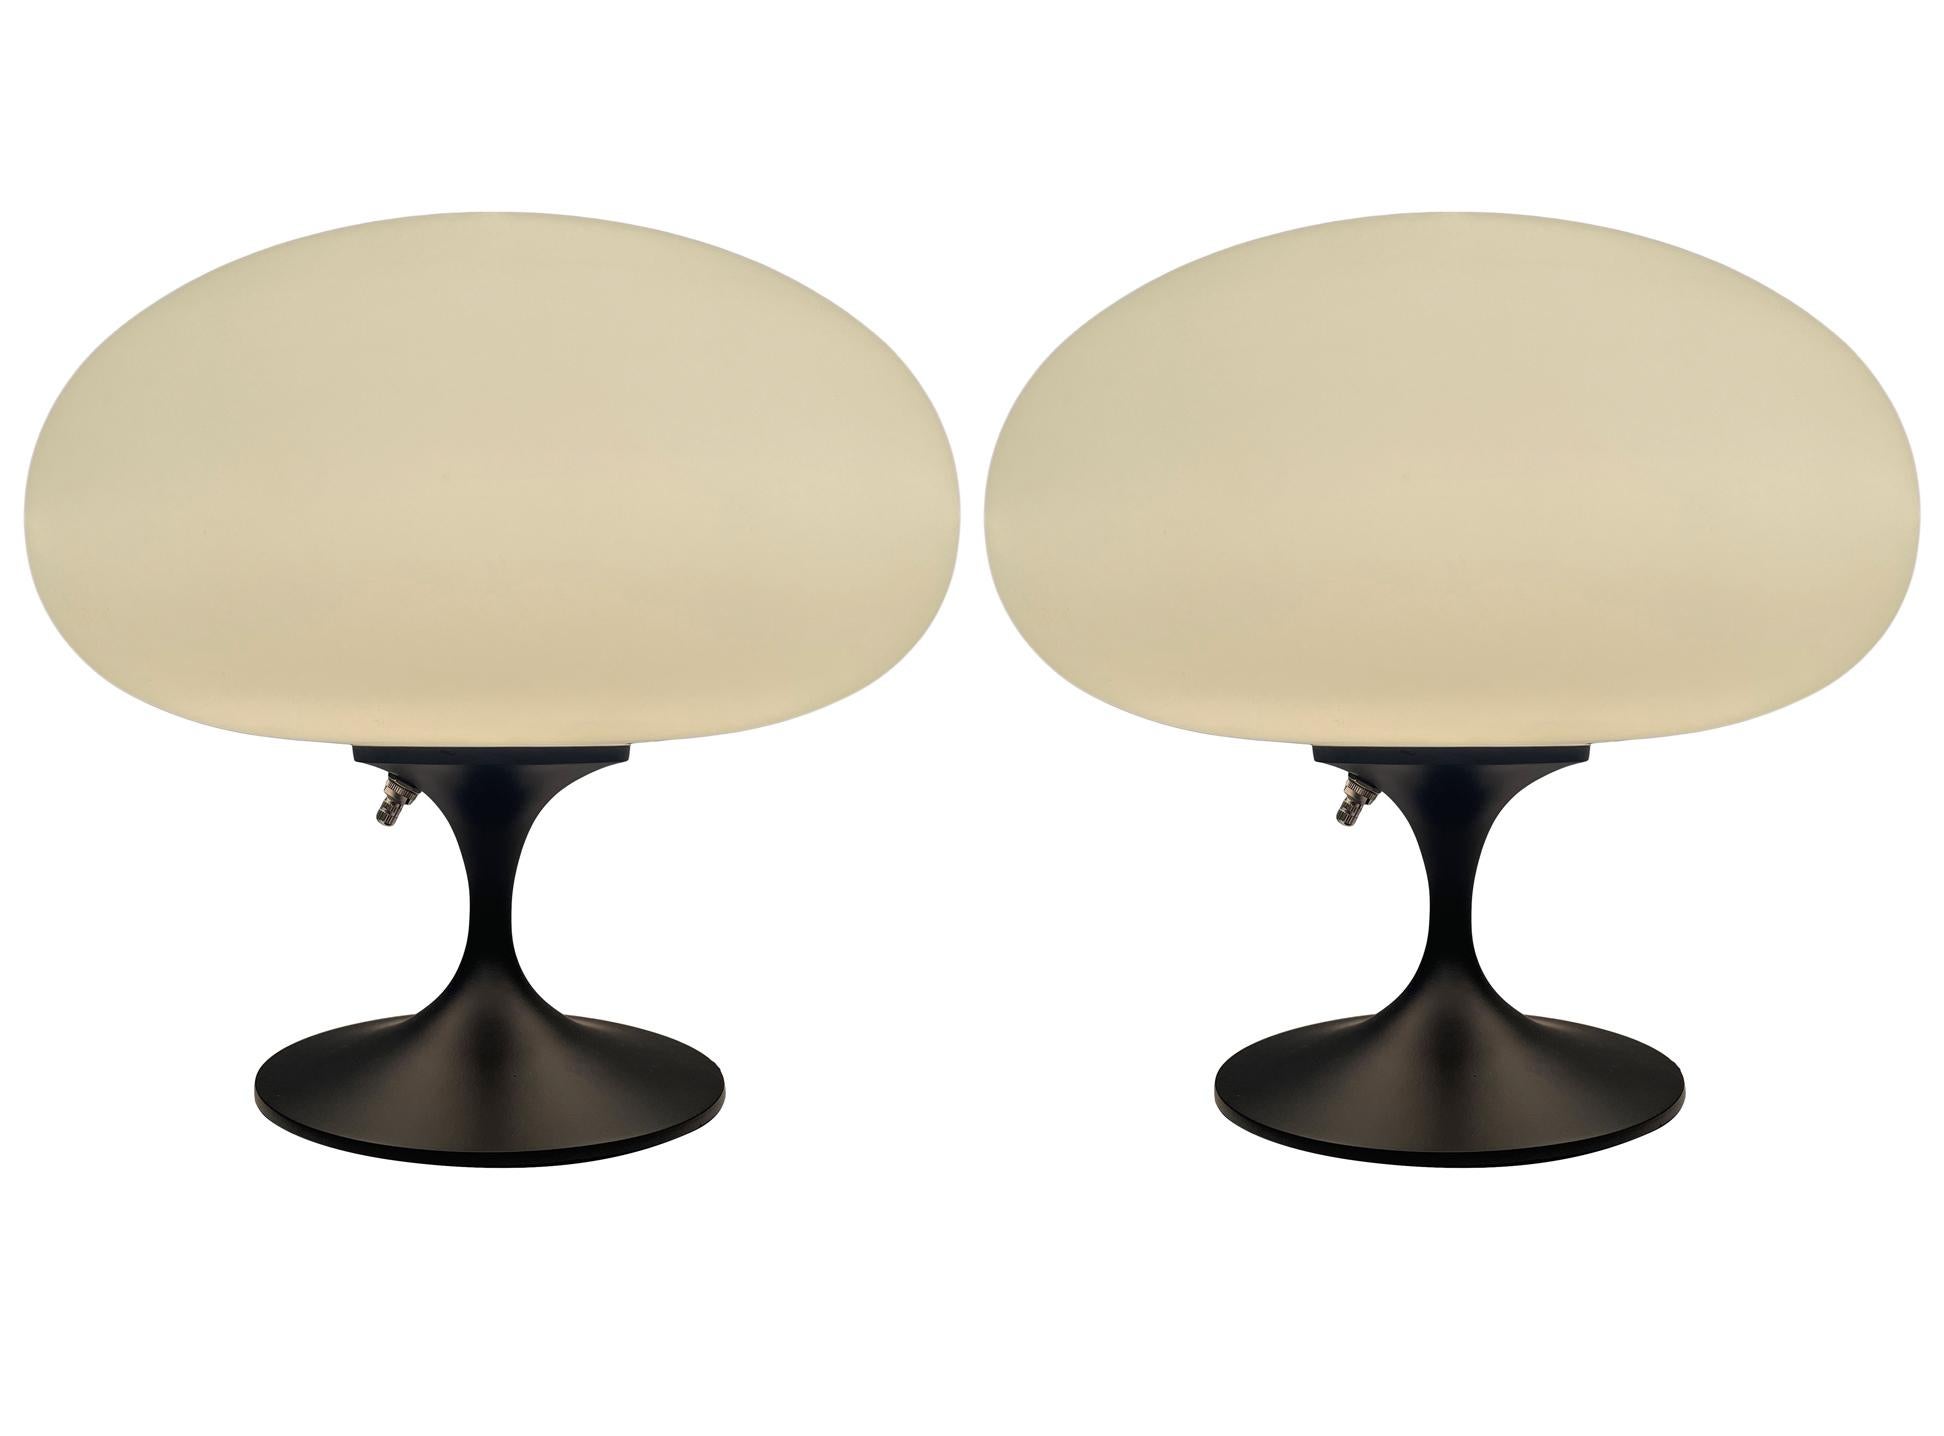 Pair of Mid Century Mushroom Table Lamps by Designline in Black & White Glass In New Condition For Sale In Philadelphia, PA